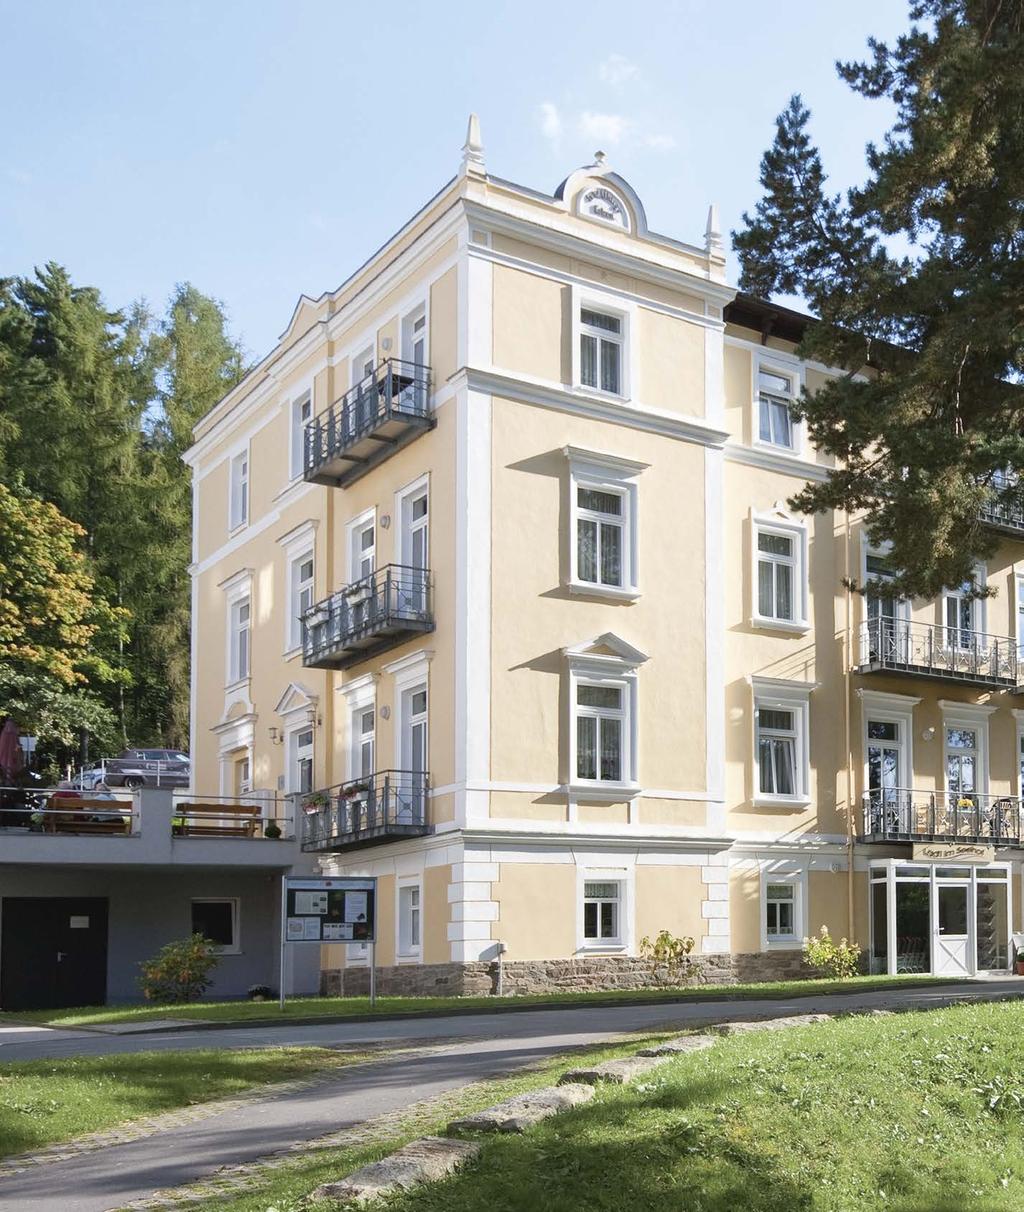 6 KATHARINENHOF residential park in Warmbad, Saxony, part of our portfolio since 2007 7 We are also setting high standards of quality in the field of nursing care.